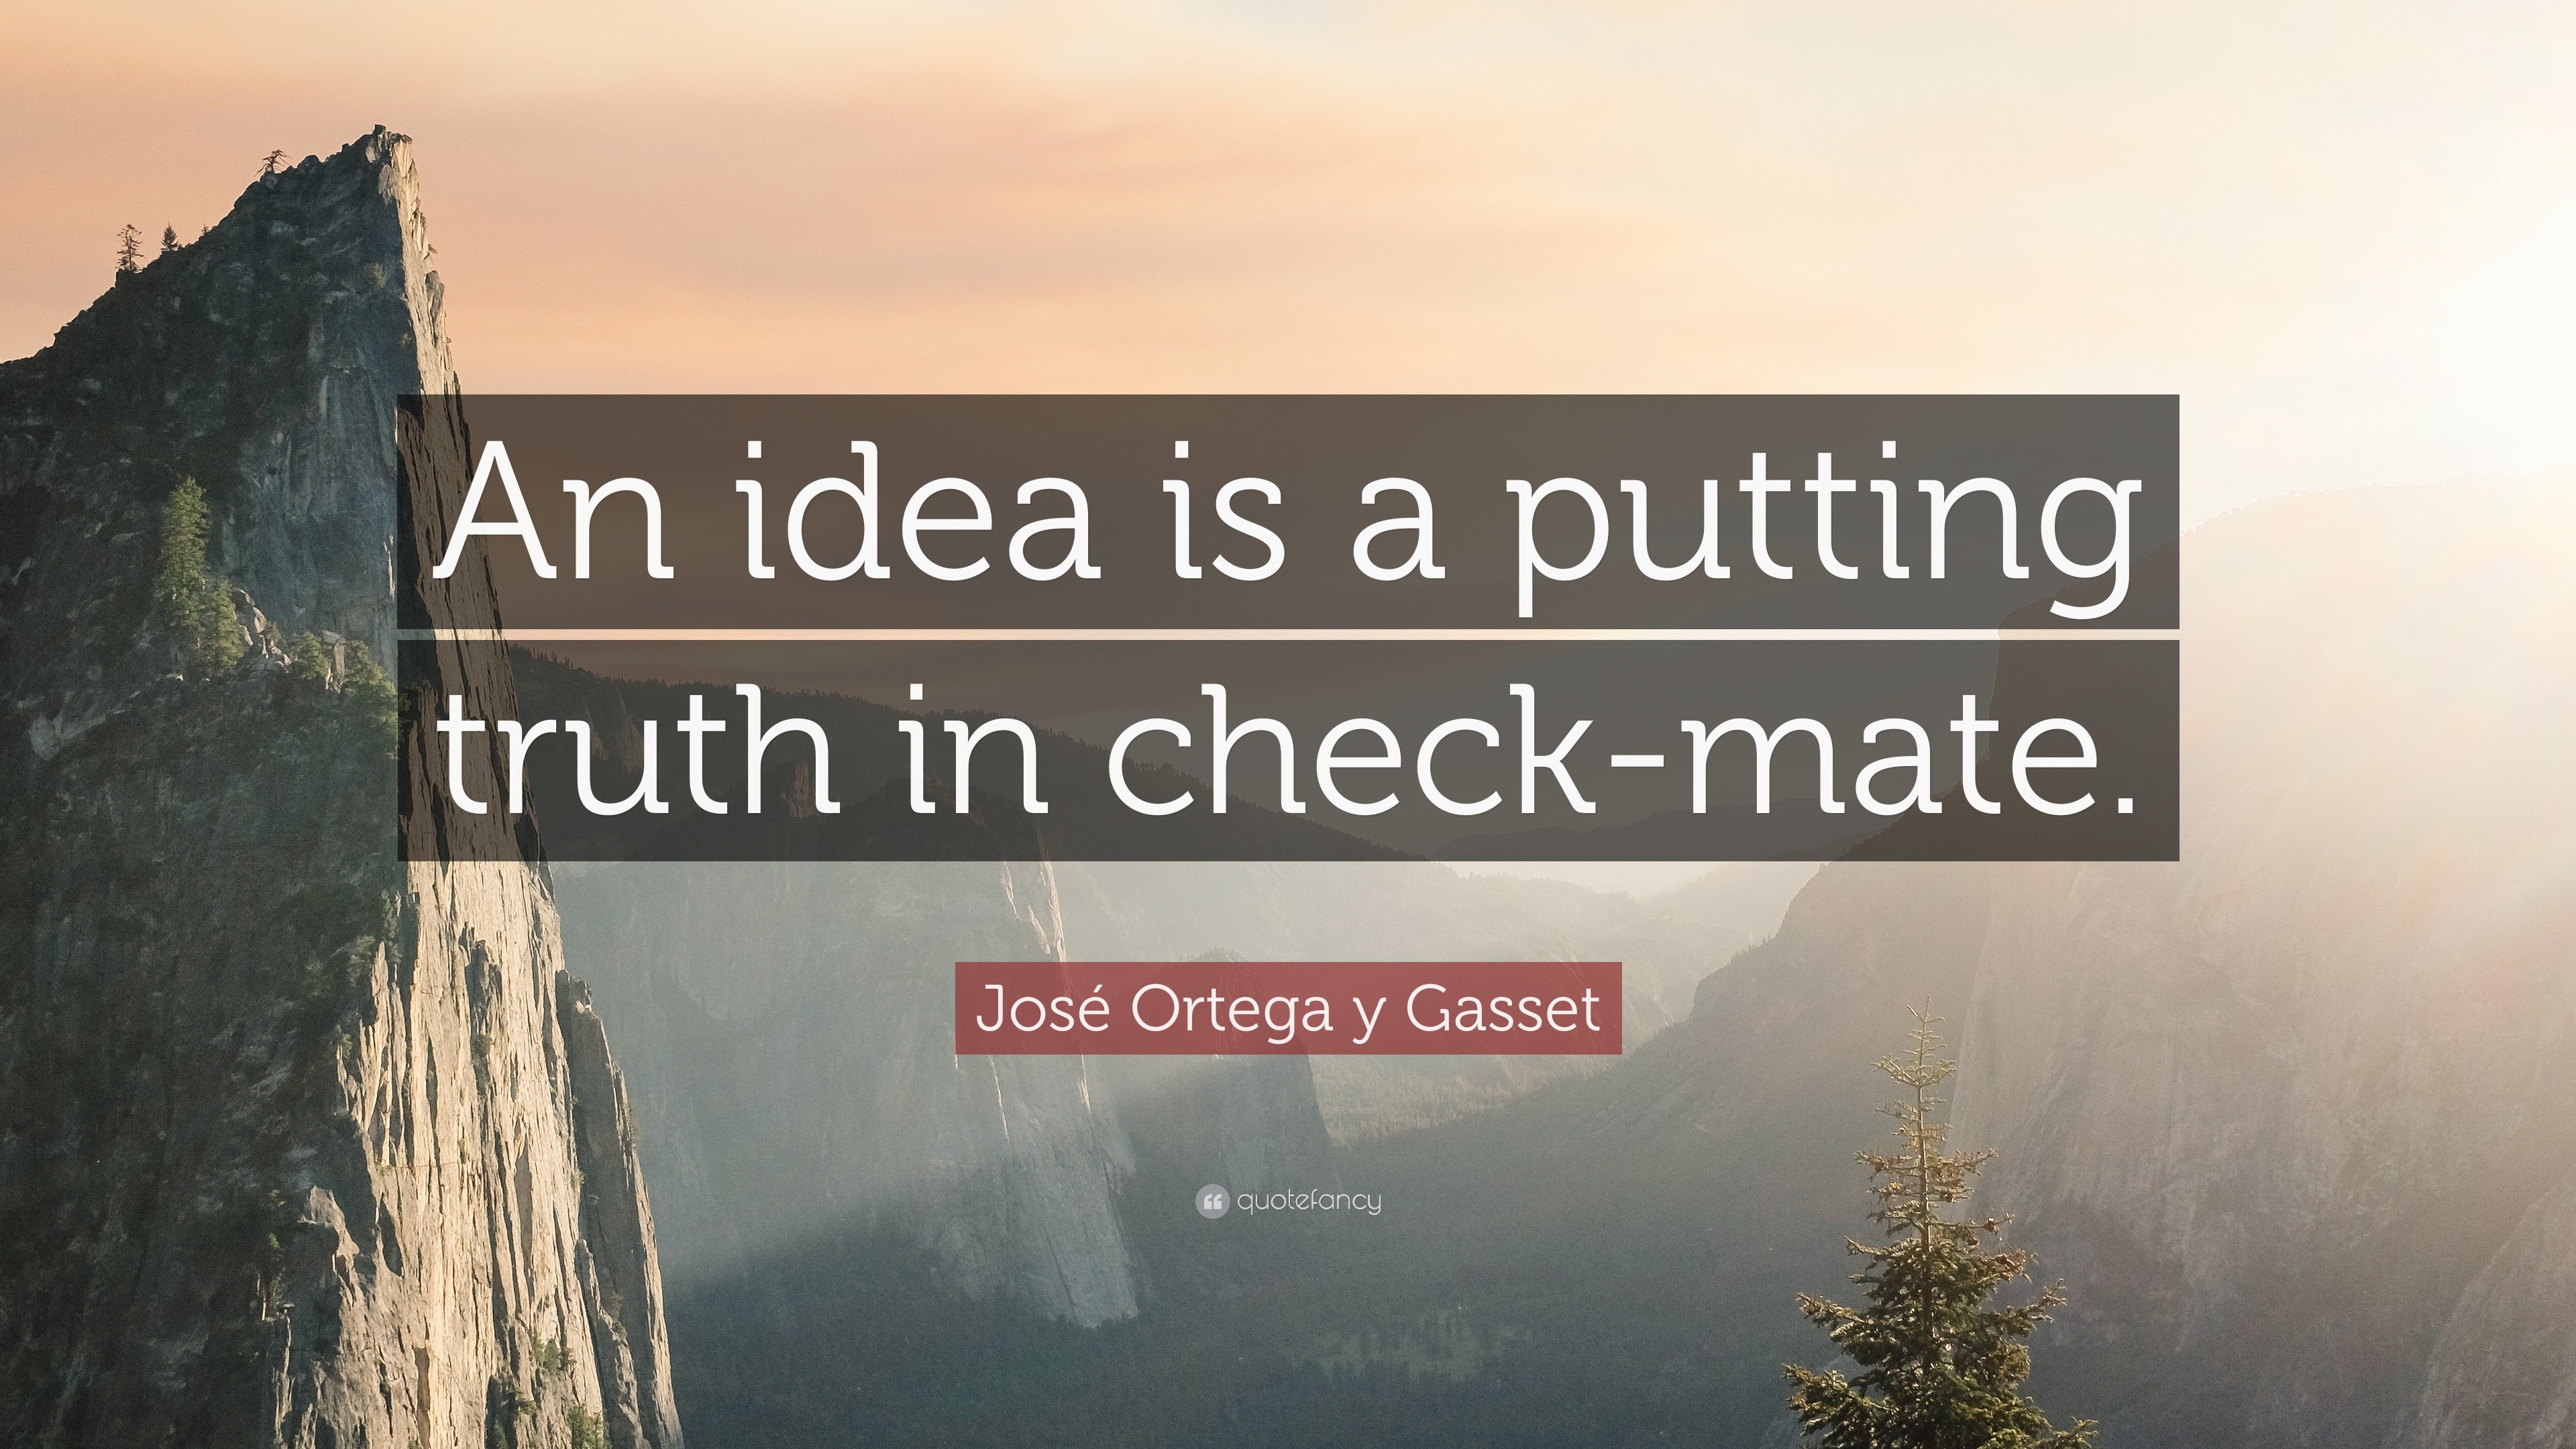 José Ortega y Gasset Quote: “An idea is a putting truth in check